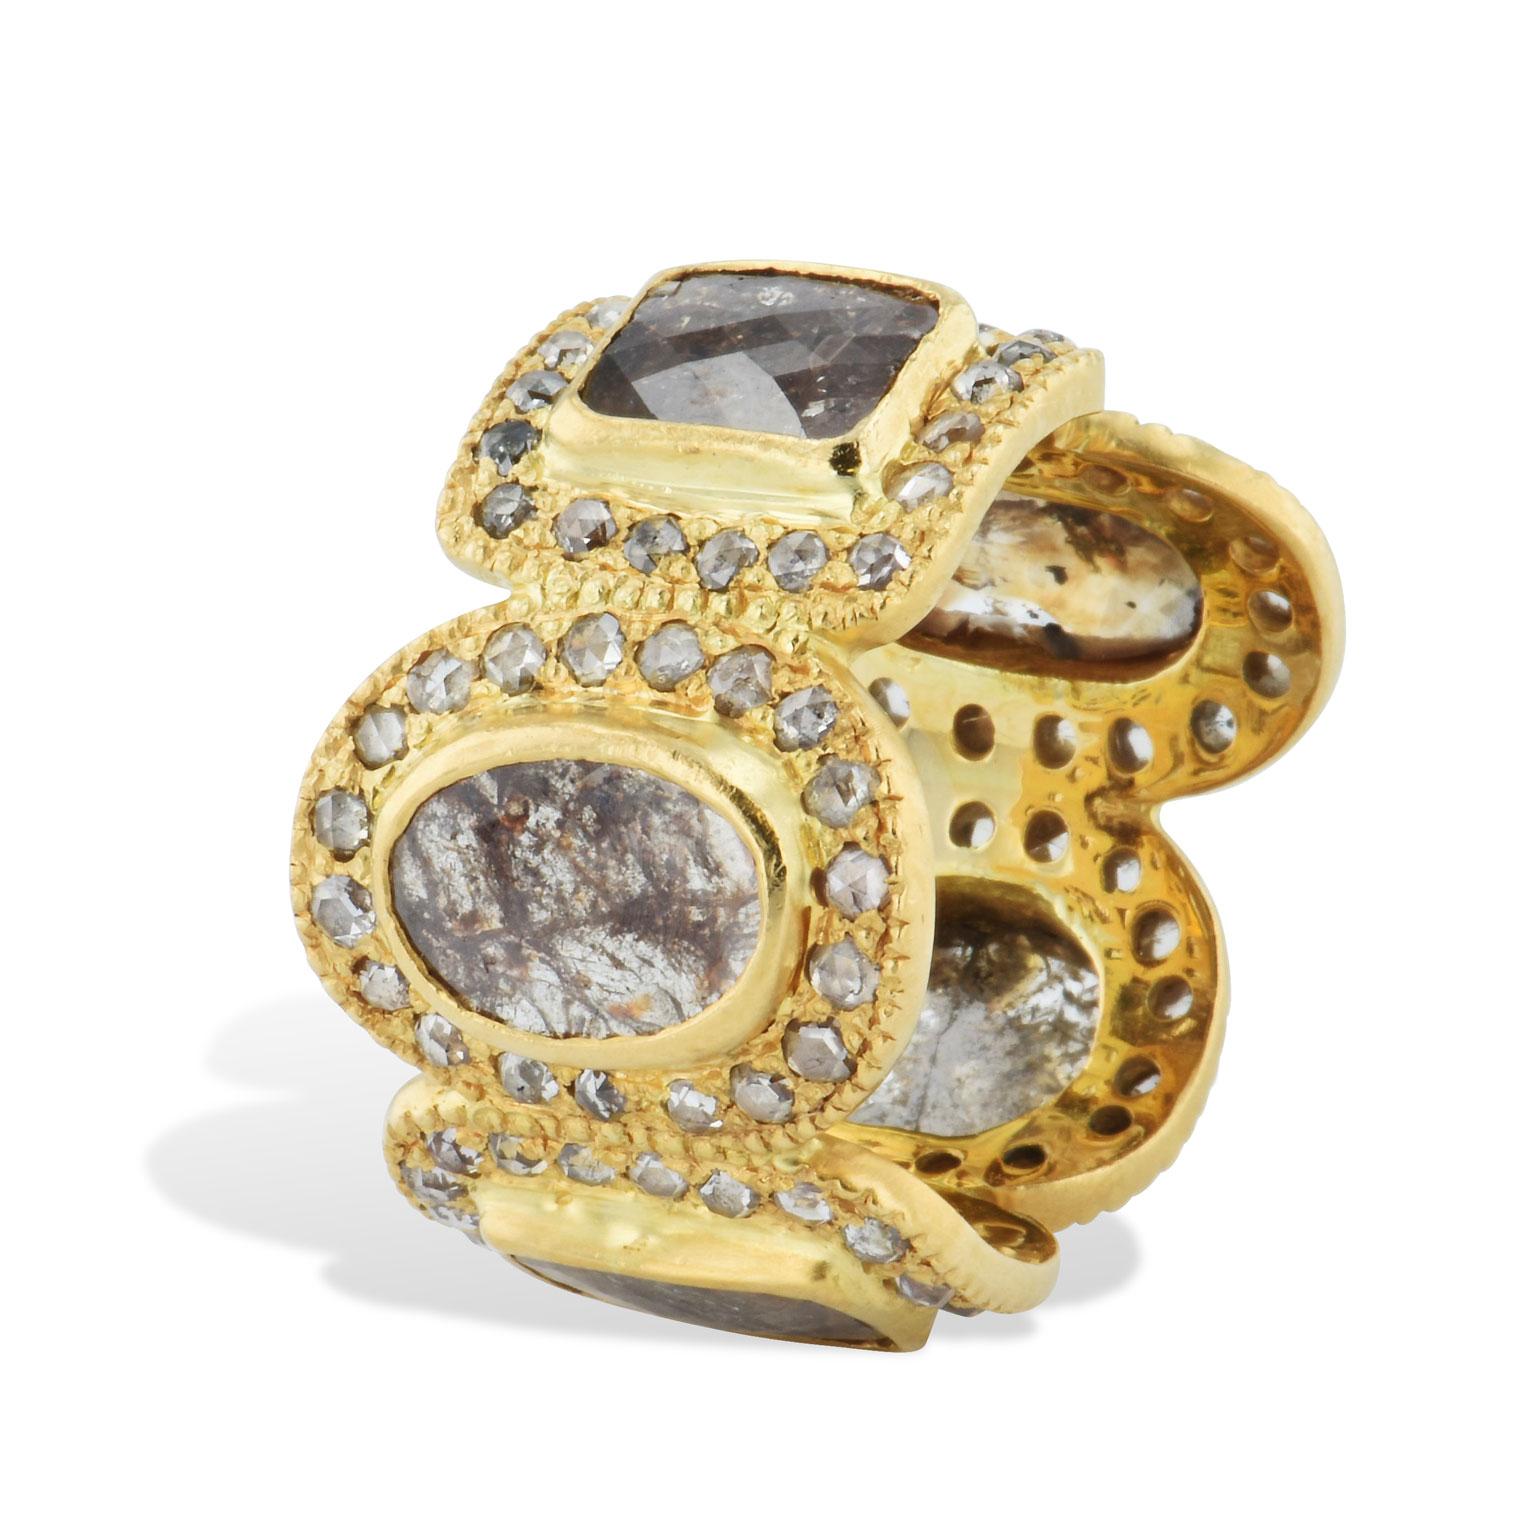 This previously loved Coomi luminosity diamond slice ring features 98 rose cut diamonds and five diamond slices, fashioned in 18 karat yellow gold. This piece is bold, vibrant, and shines from within while allowing the wearer to get comfortable with